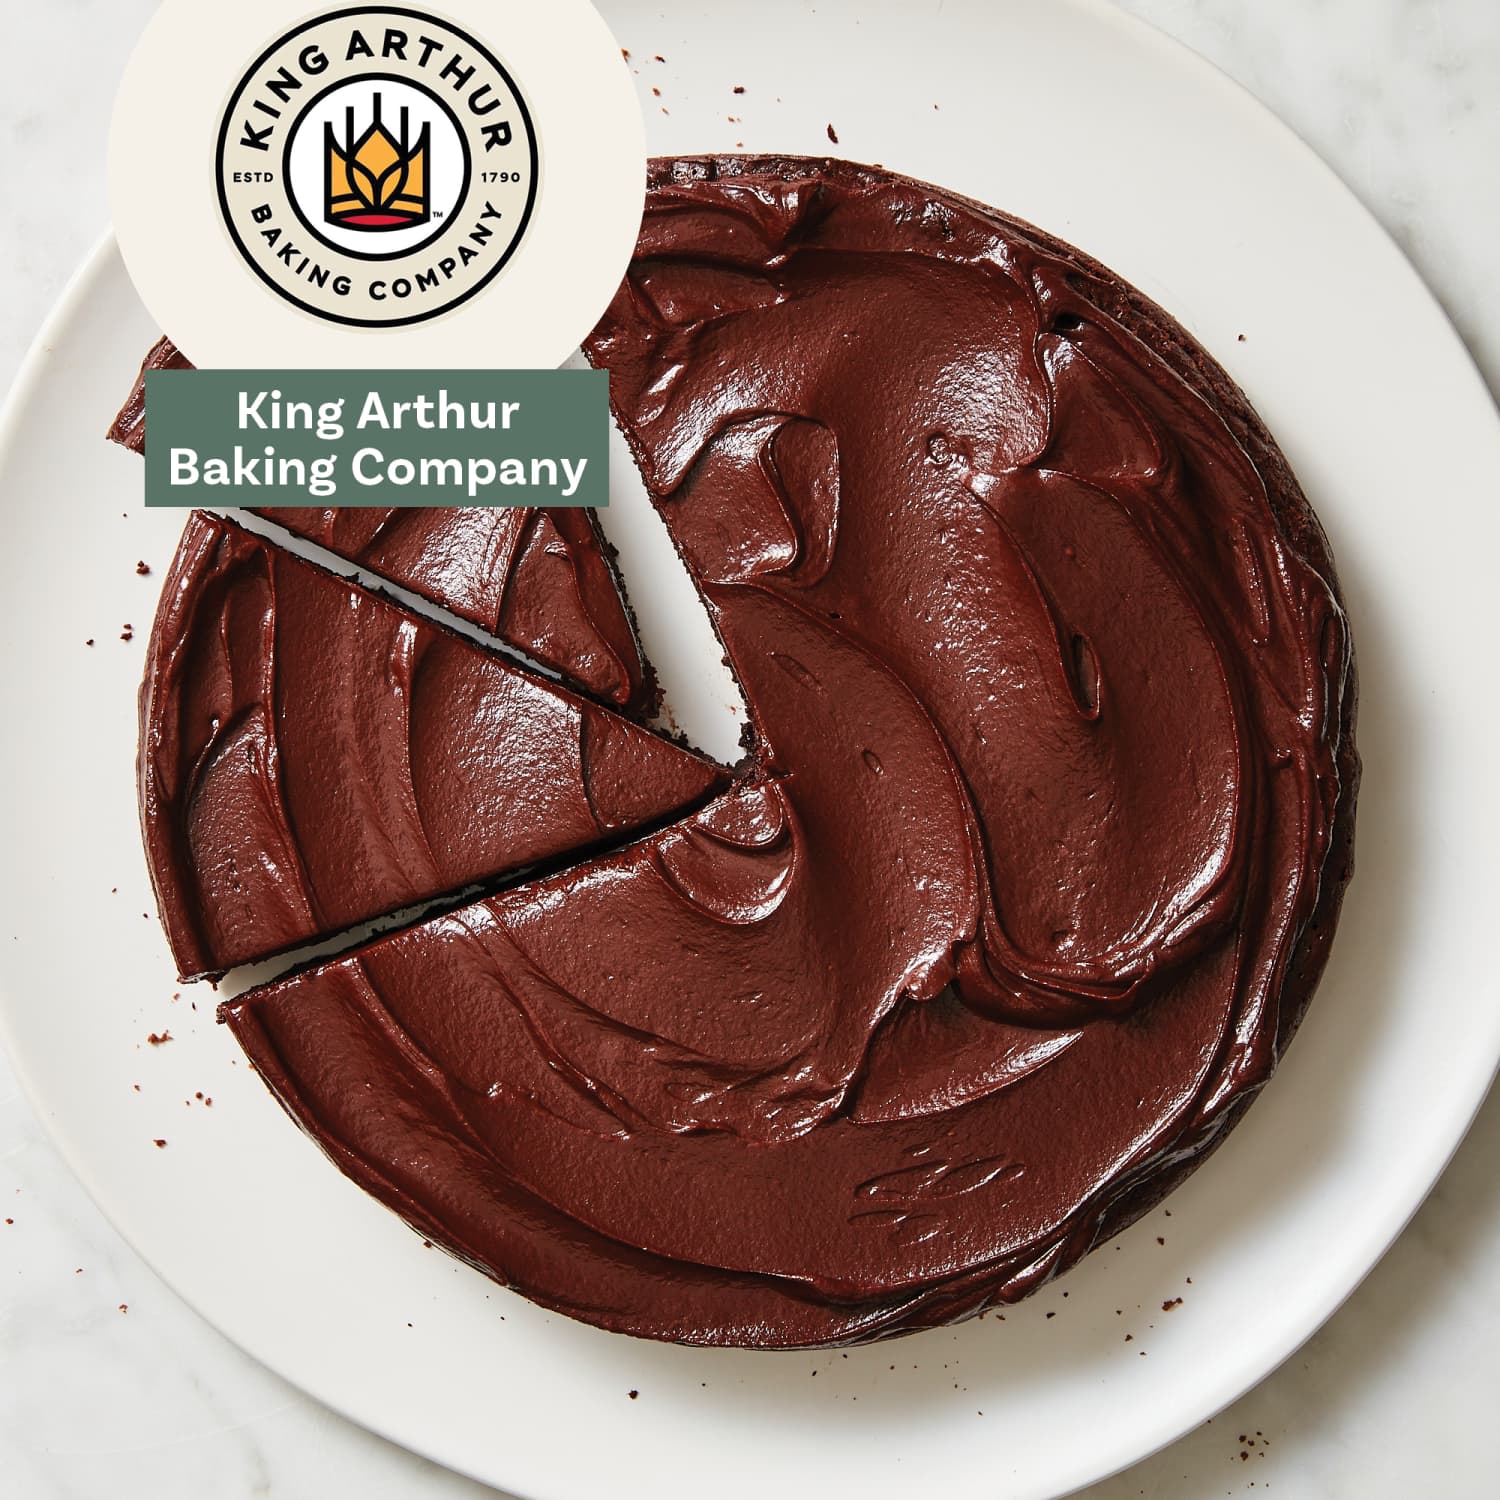 King Arthur Baking Company - Turn any cake into a snack cake by